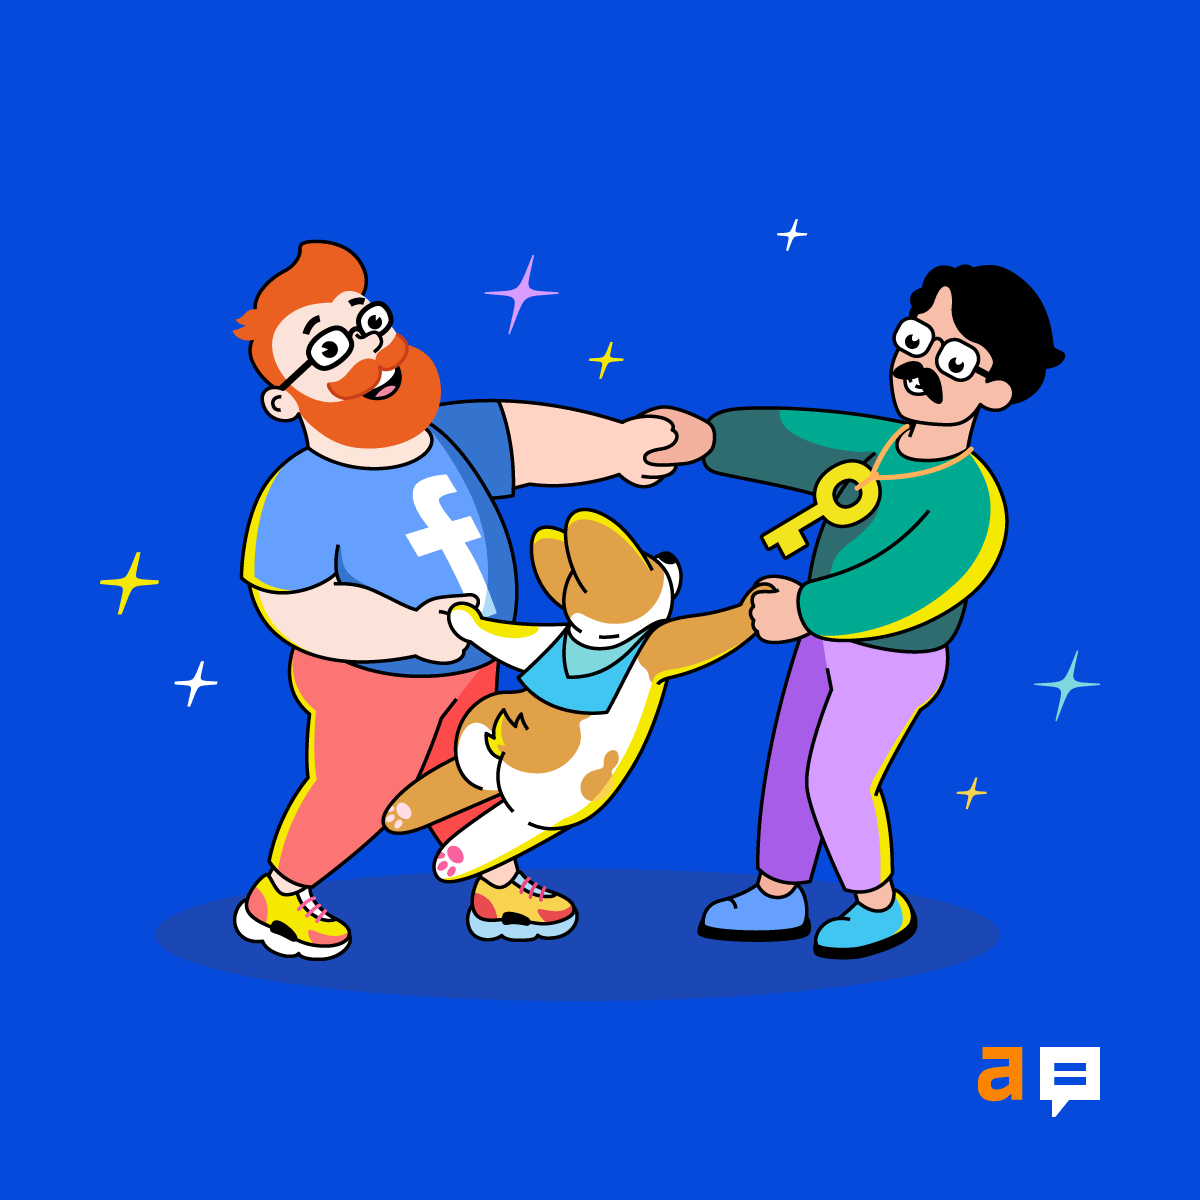 Ahrefs' mascots holding hands/paws and moving in a circle; notably, our bearded man and corgi make an appearance in the image